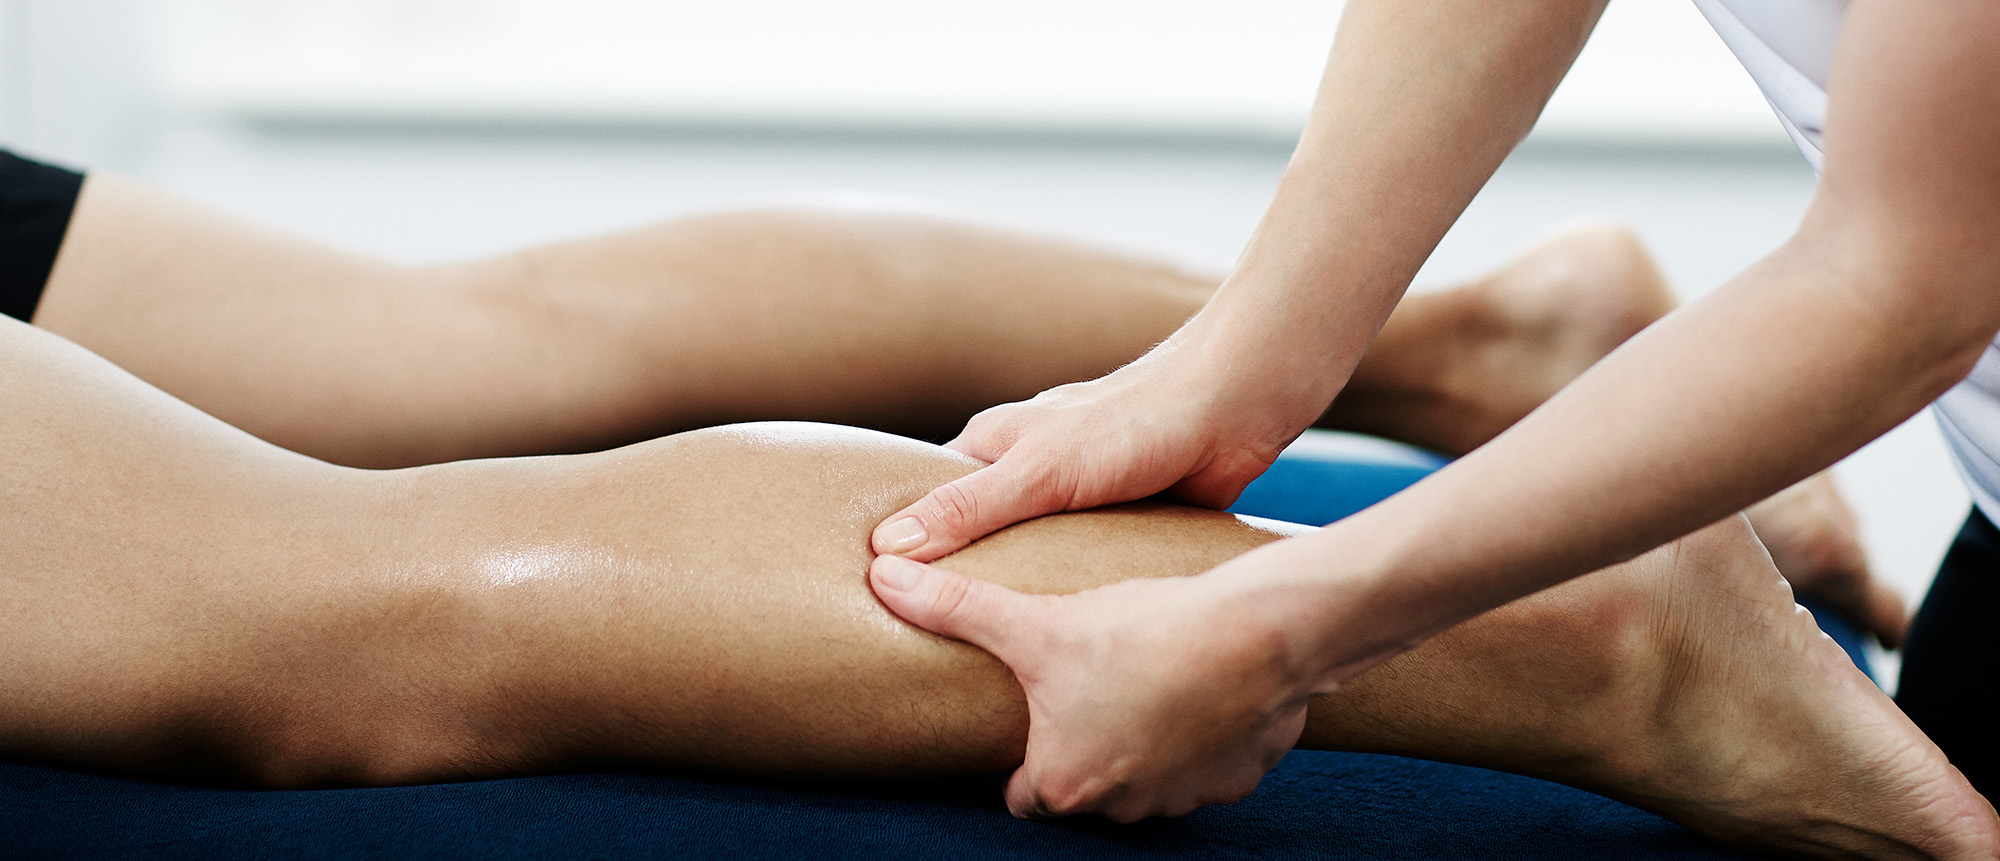 Massage Therapy at Atlanta's Best Physical Therapy Practice - One on One Physical Therapy